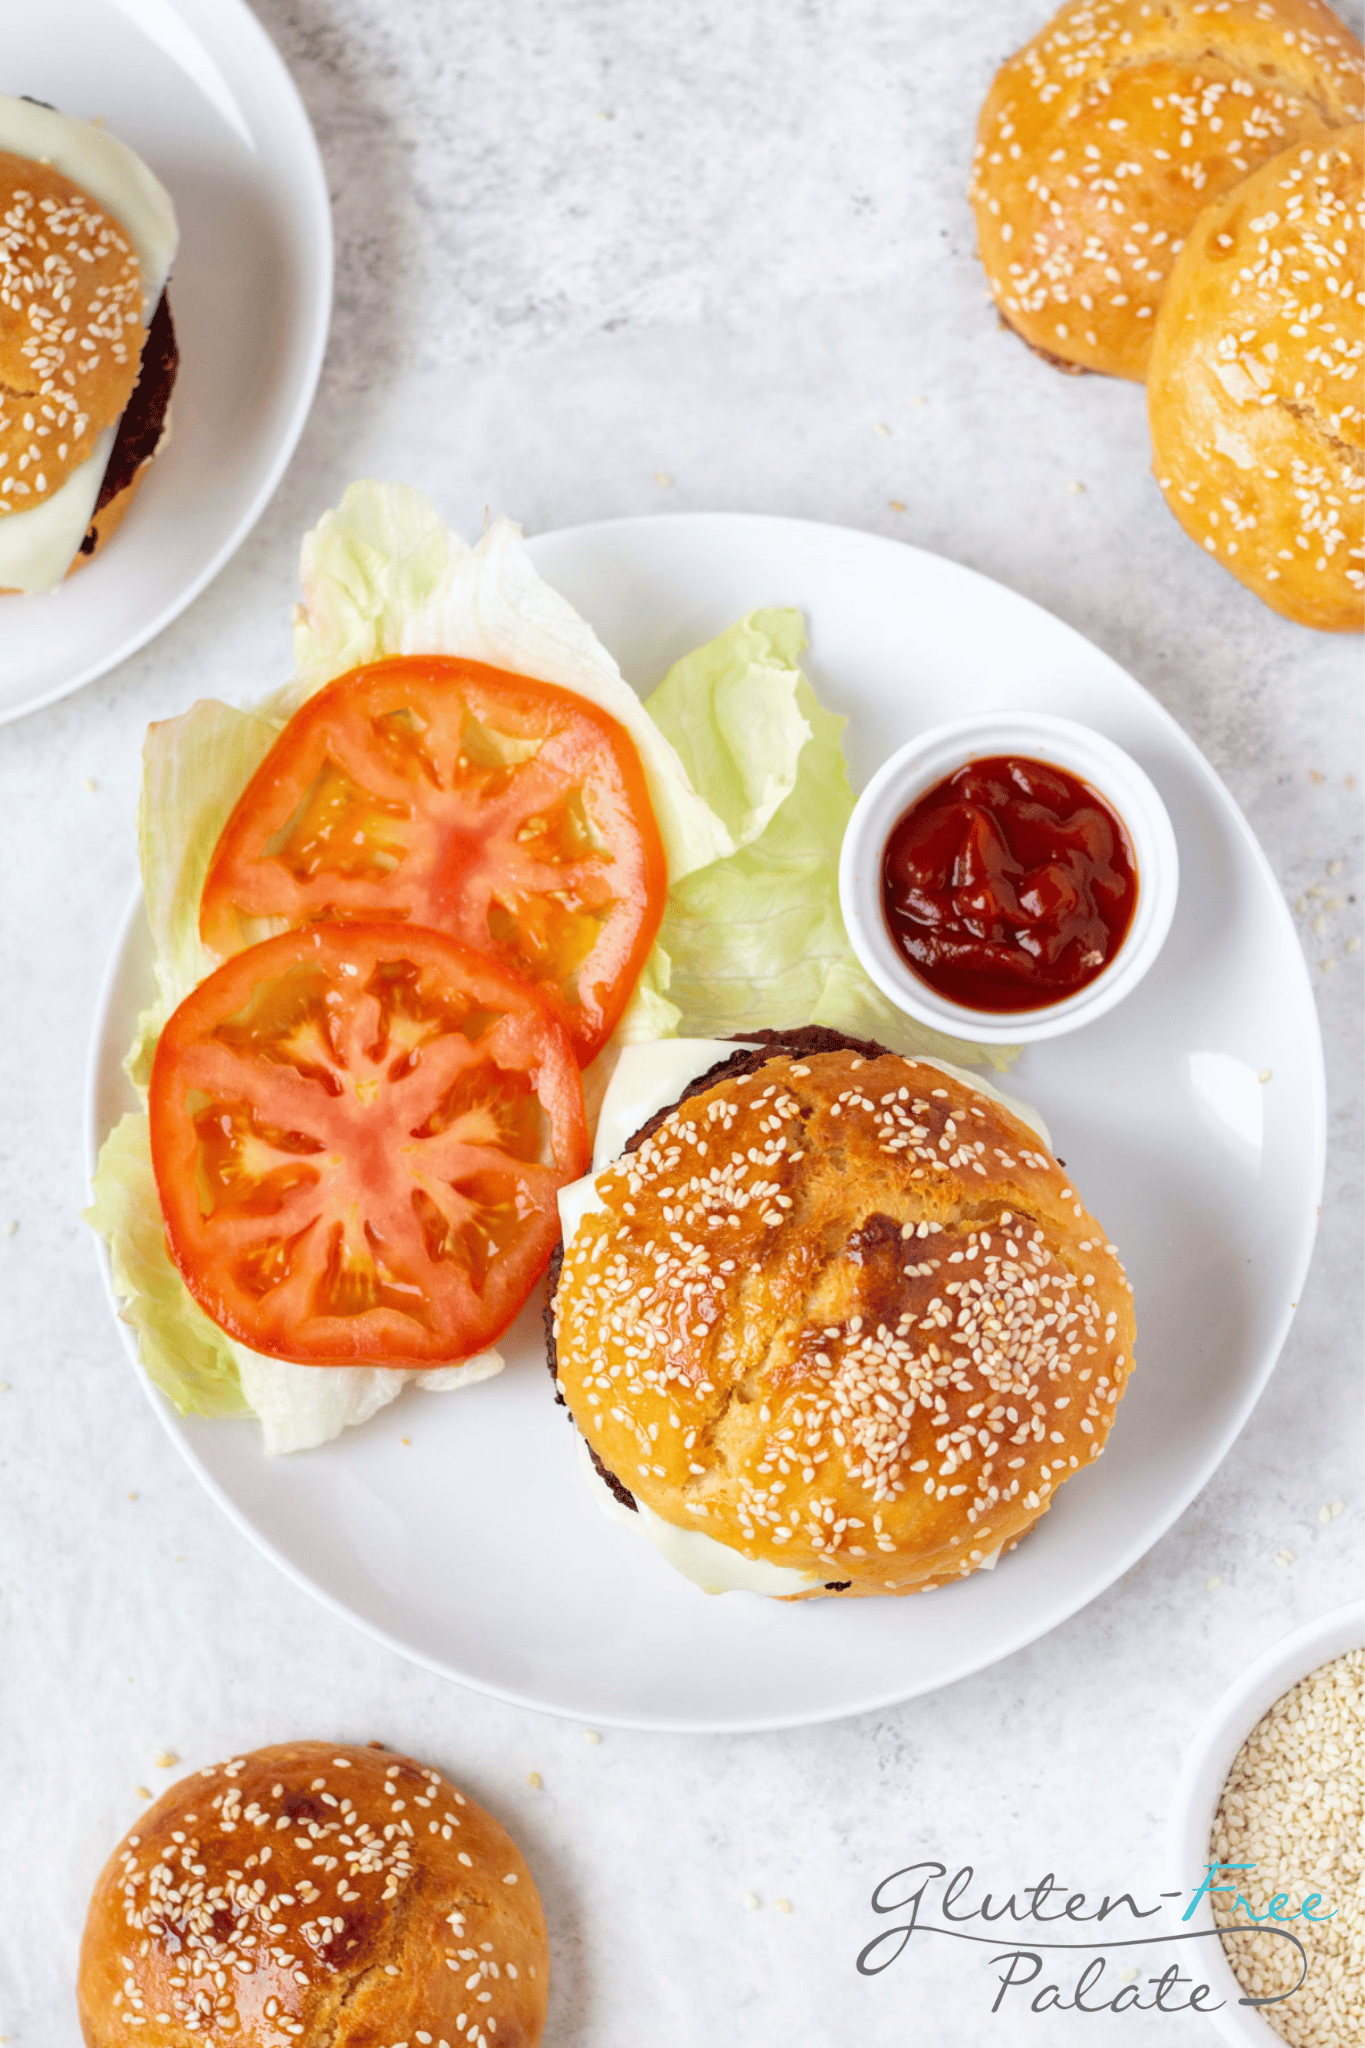 Gluten-Free Hamburger Bun with a patty on a white plate with garnishes.